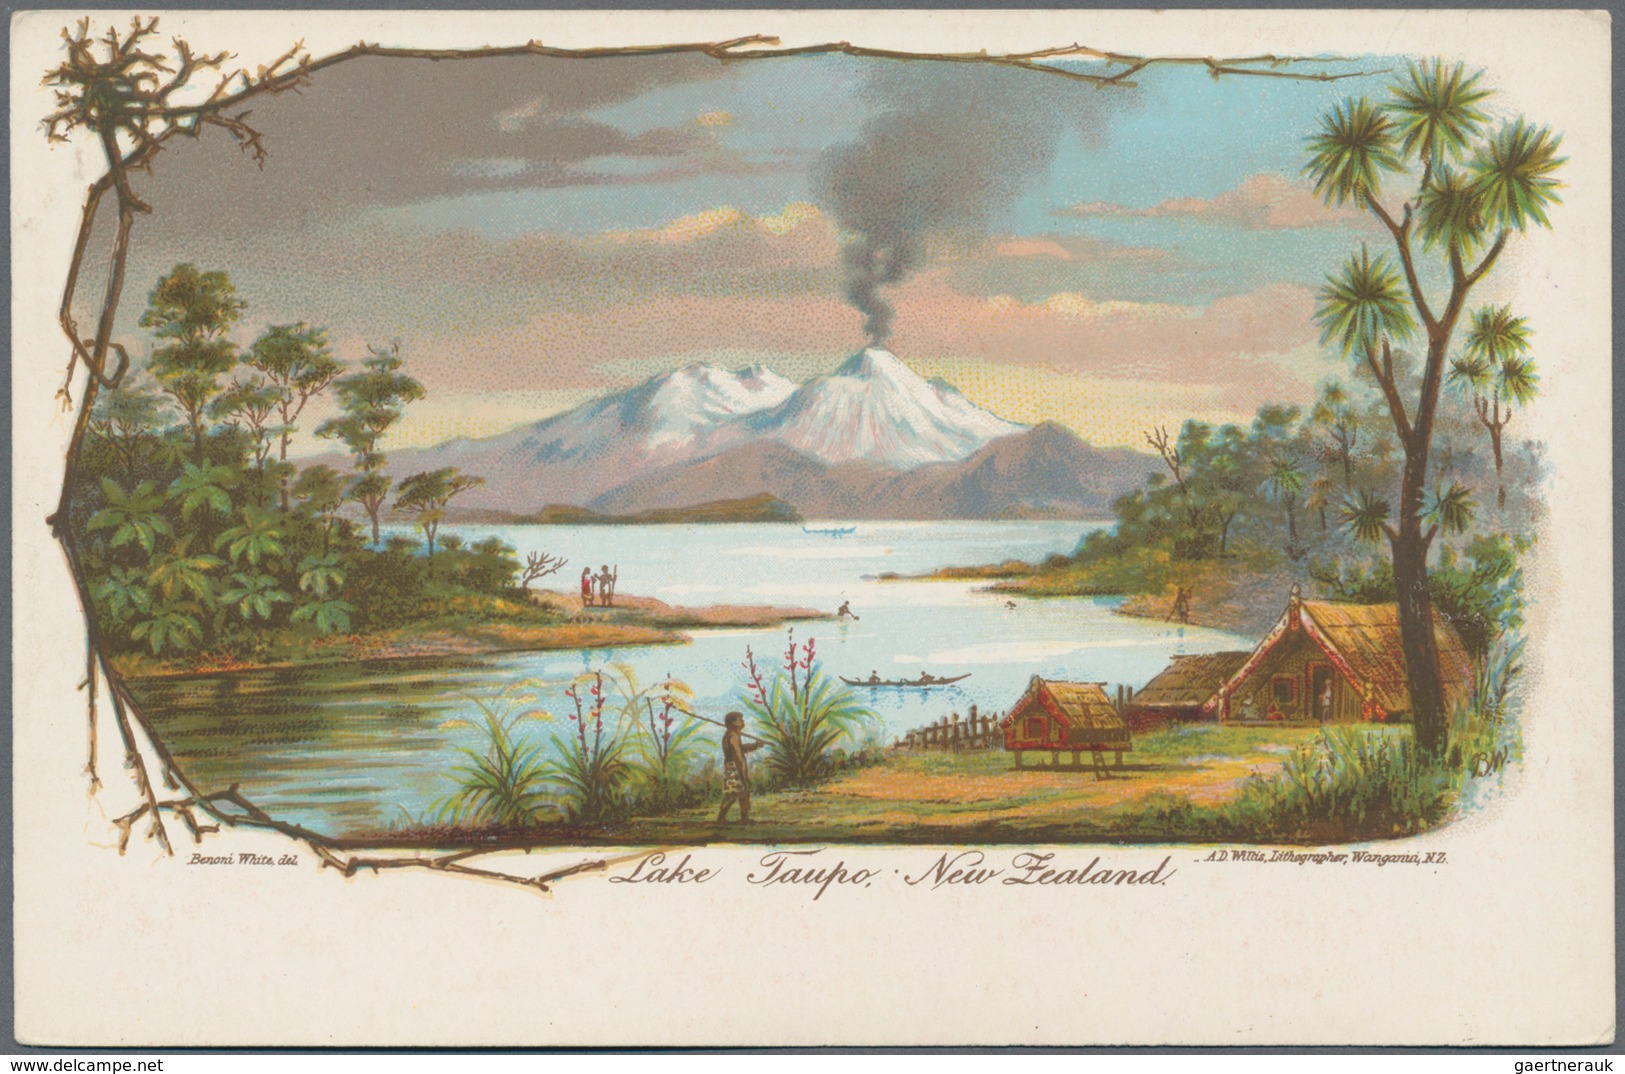 Neuseeland: 1903 (15.6.), nine different picture postcards 'Issued by the New Zealand Government Dep